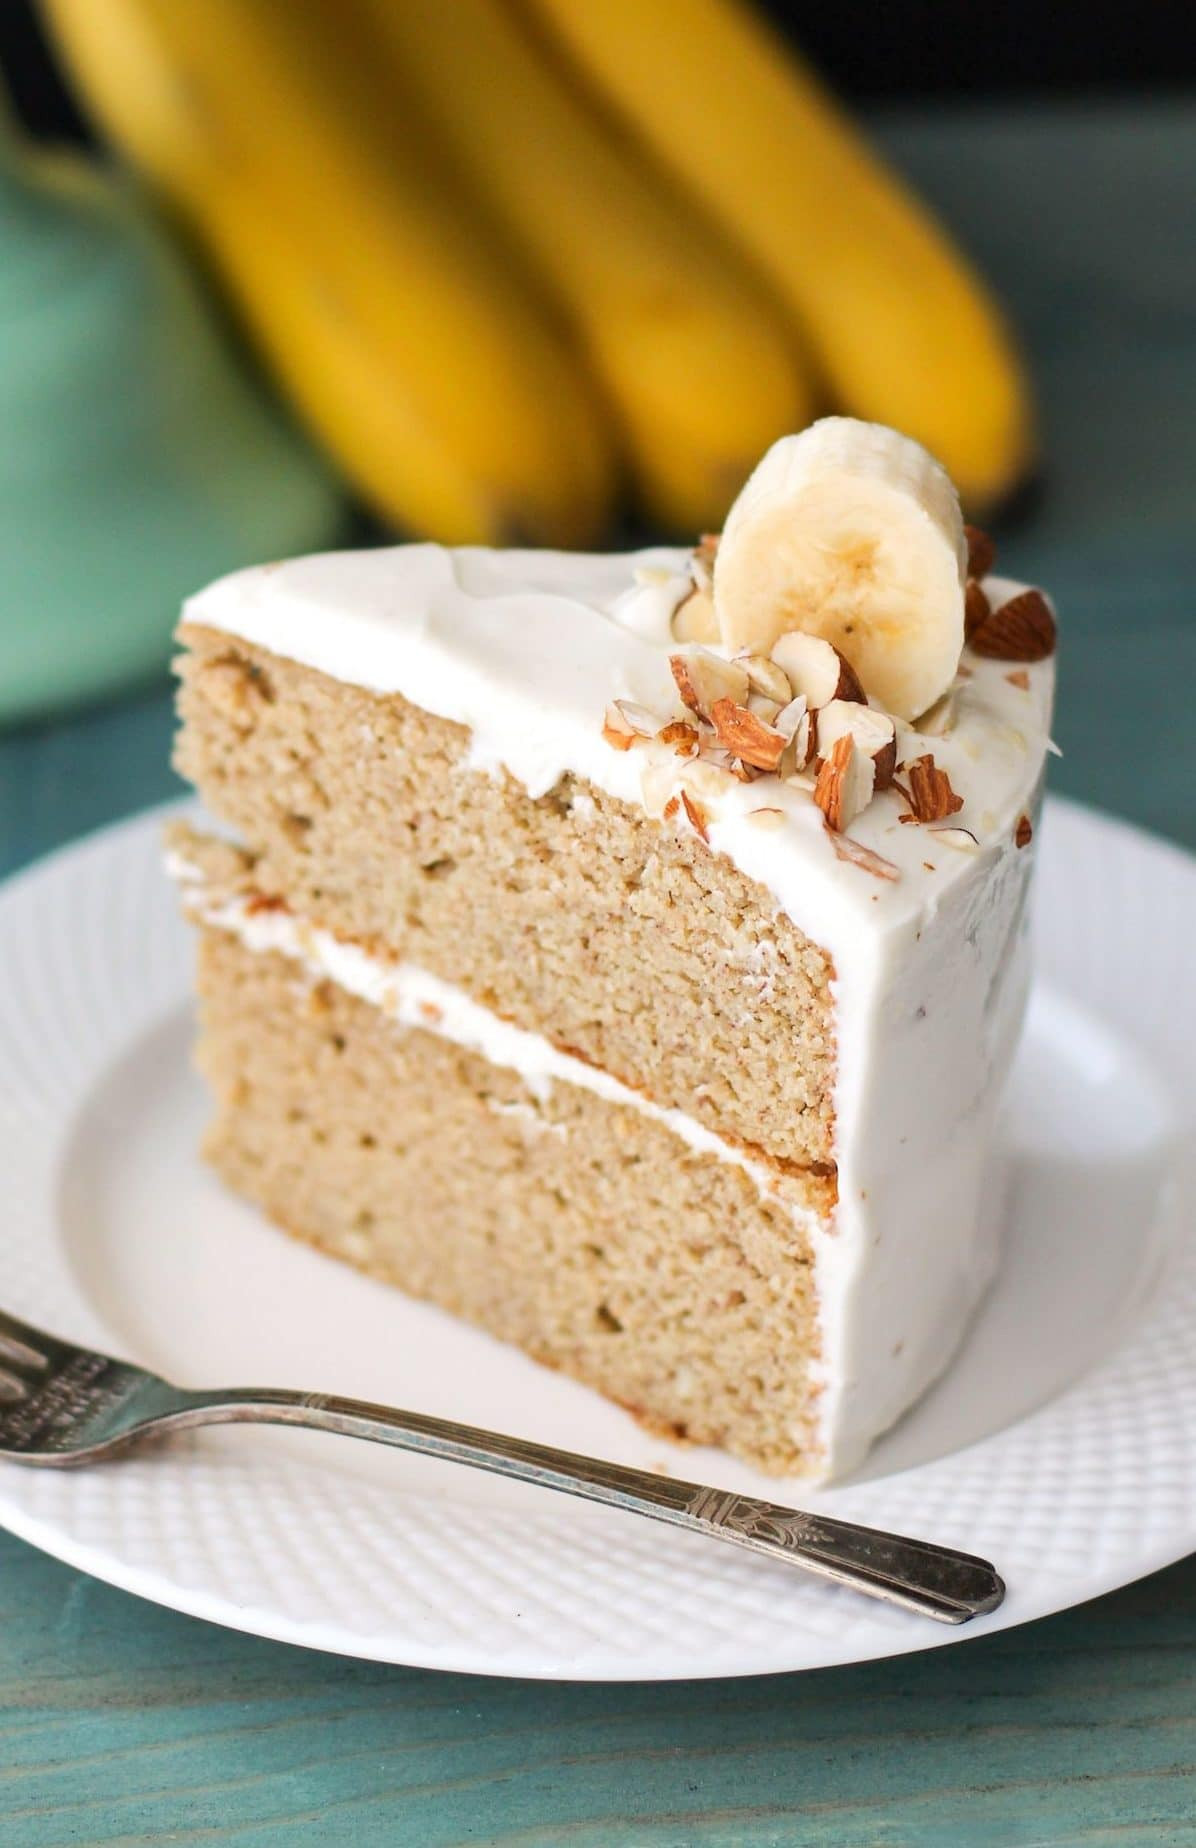 Healthy Cake Recipes
 Gluten Free Healthy Banana Cake with Cream Cheese Frosting